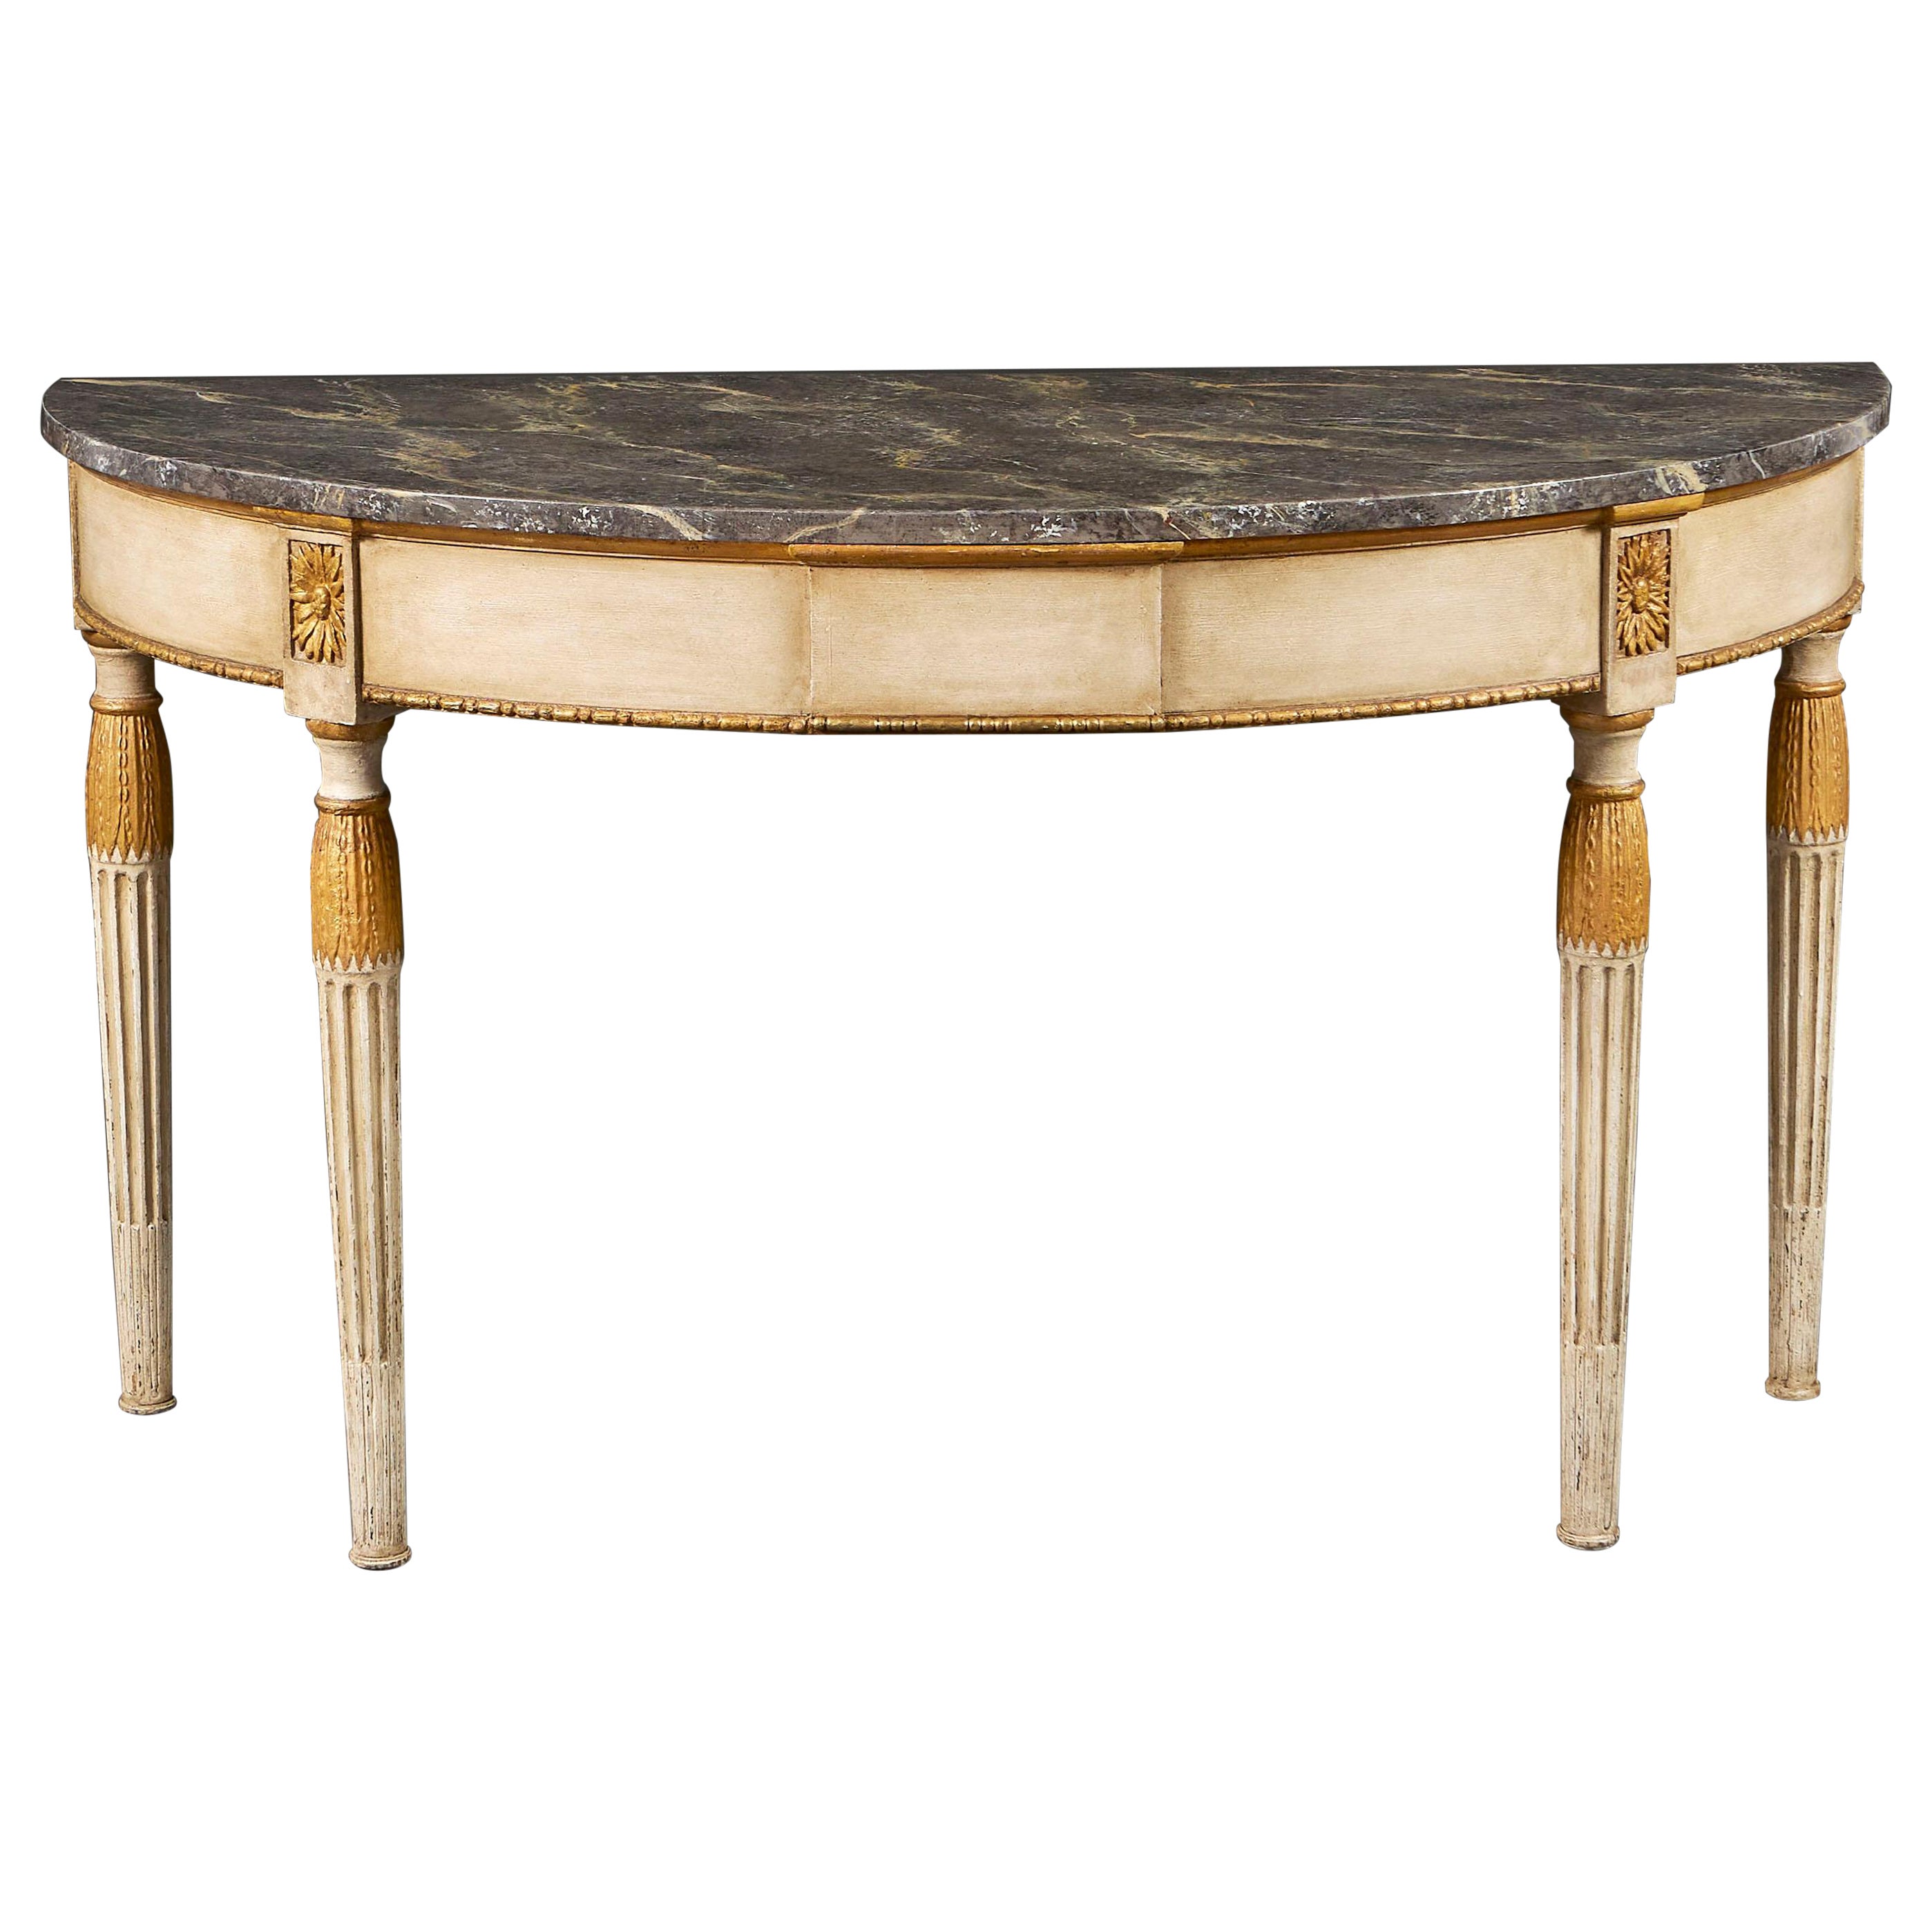 A 19th century Baltic painted pier demi-lune table